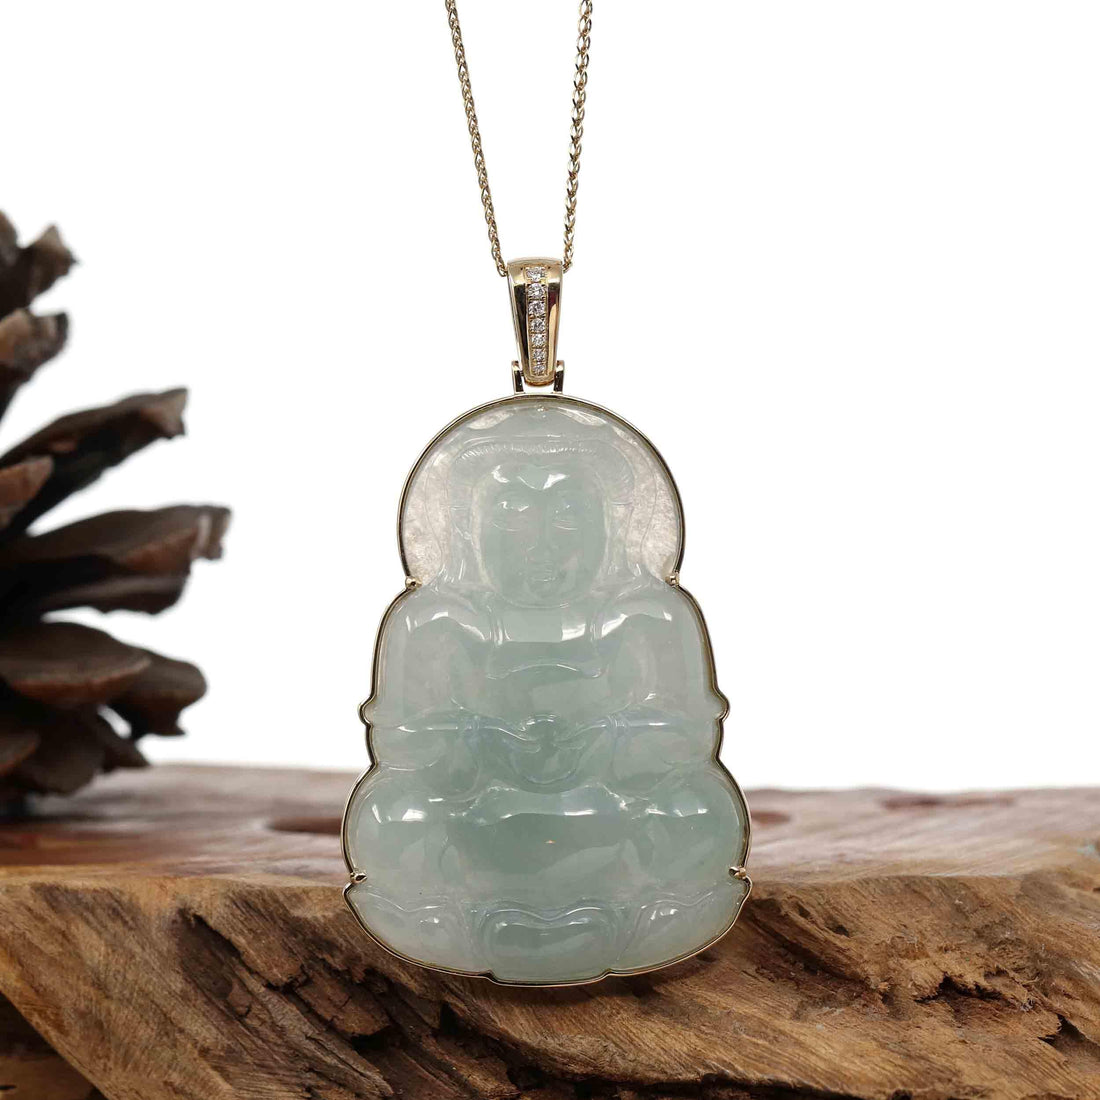 Baikalla Jewelry Jade Guanyin Pendant Necklace Copy of "Goddess of Compassion" 14k Yellow Gold Genuine Burmese Jadeite Jade Guanyin Necklace With Good Luck Design